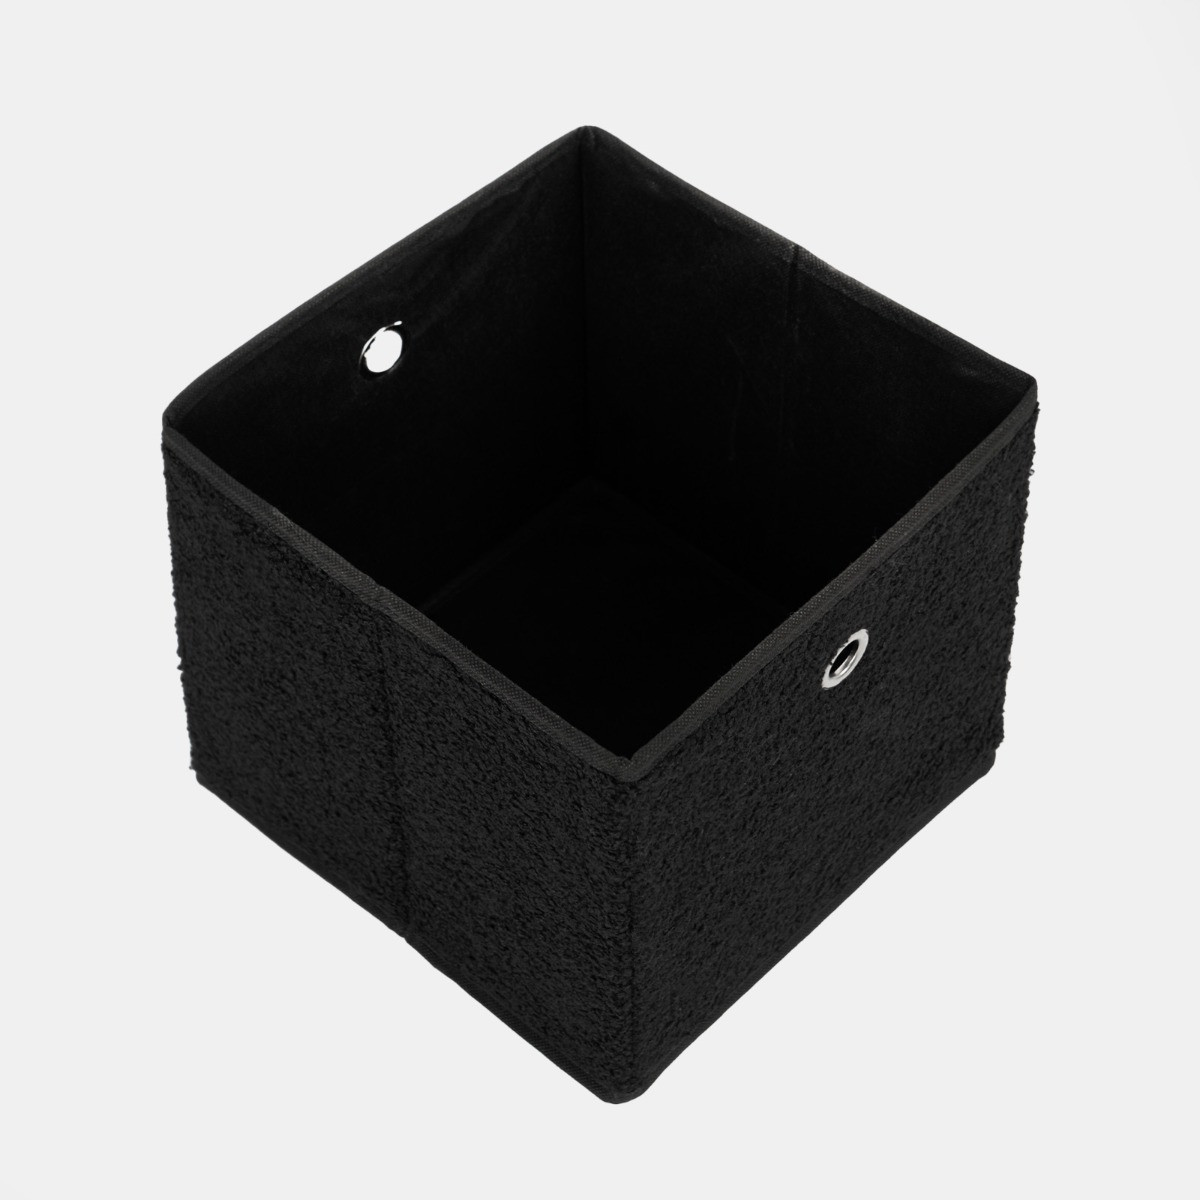 OHS Boucle Cube Storage Boxes, 2 Pack - Black>